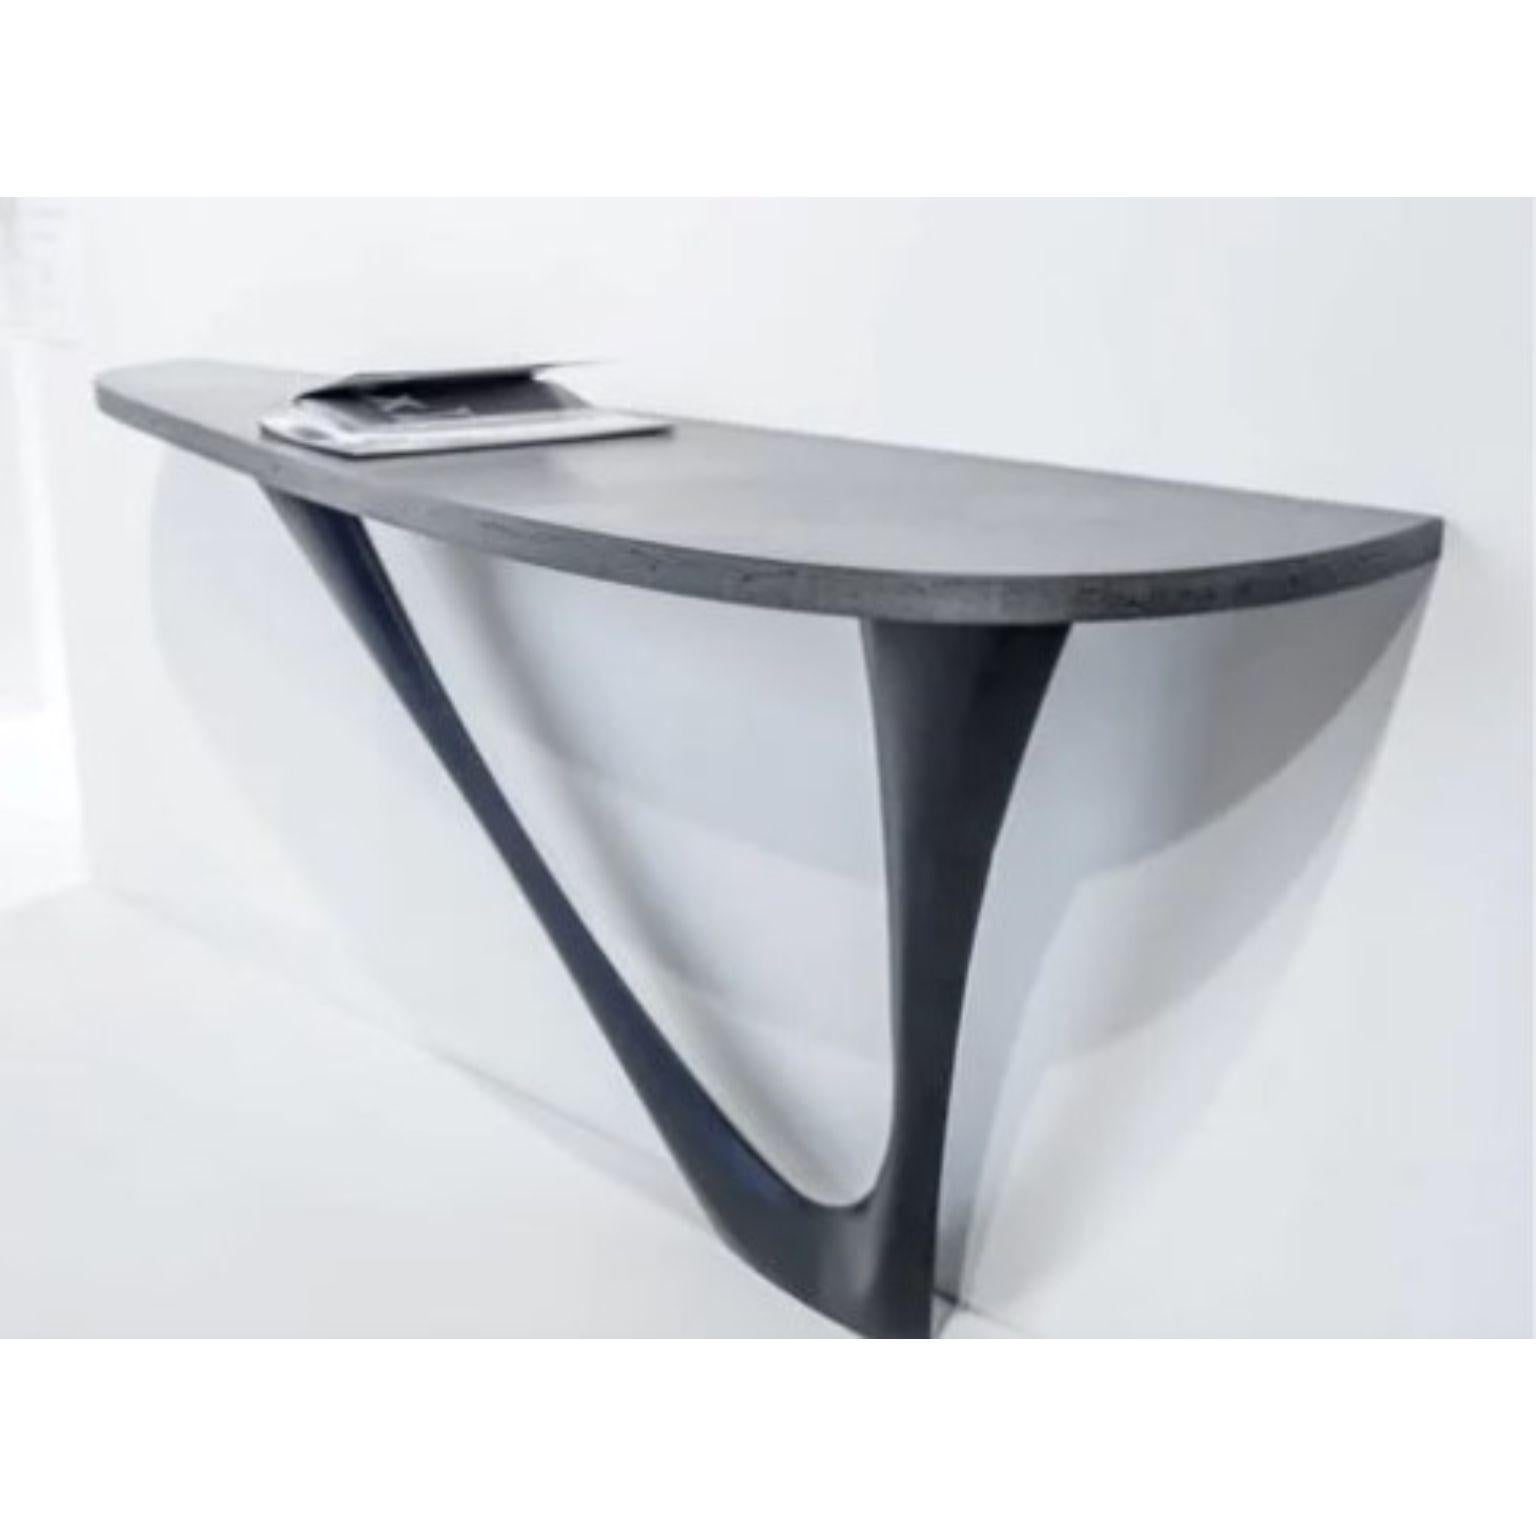 Concrete Grey G-Console Steel Base with Steel Top Mono by Zieta For Sale 2